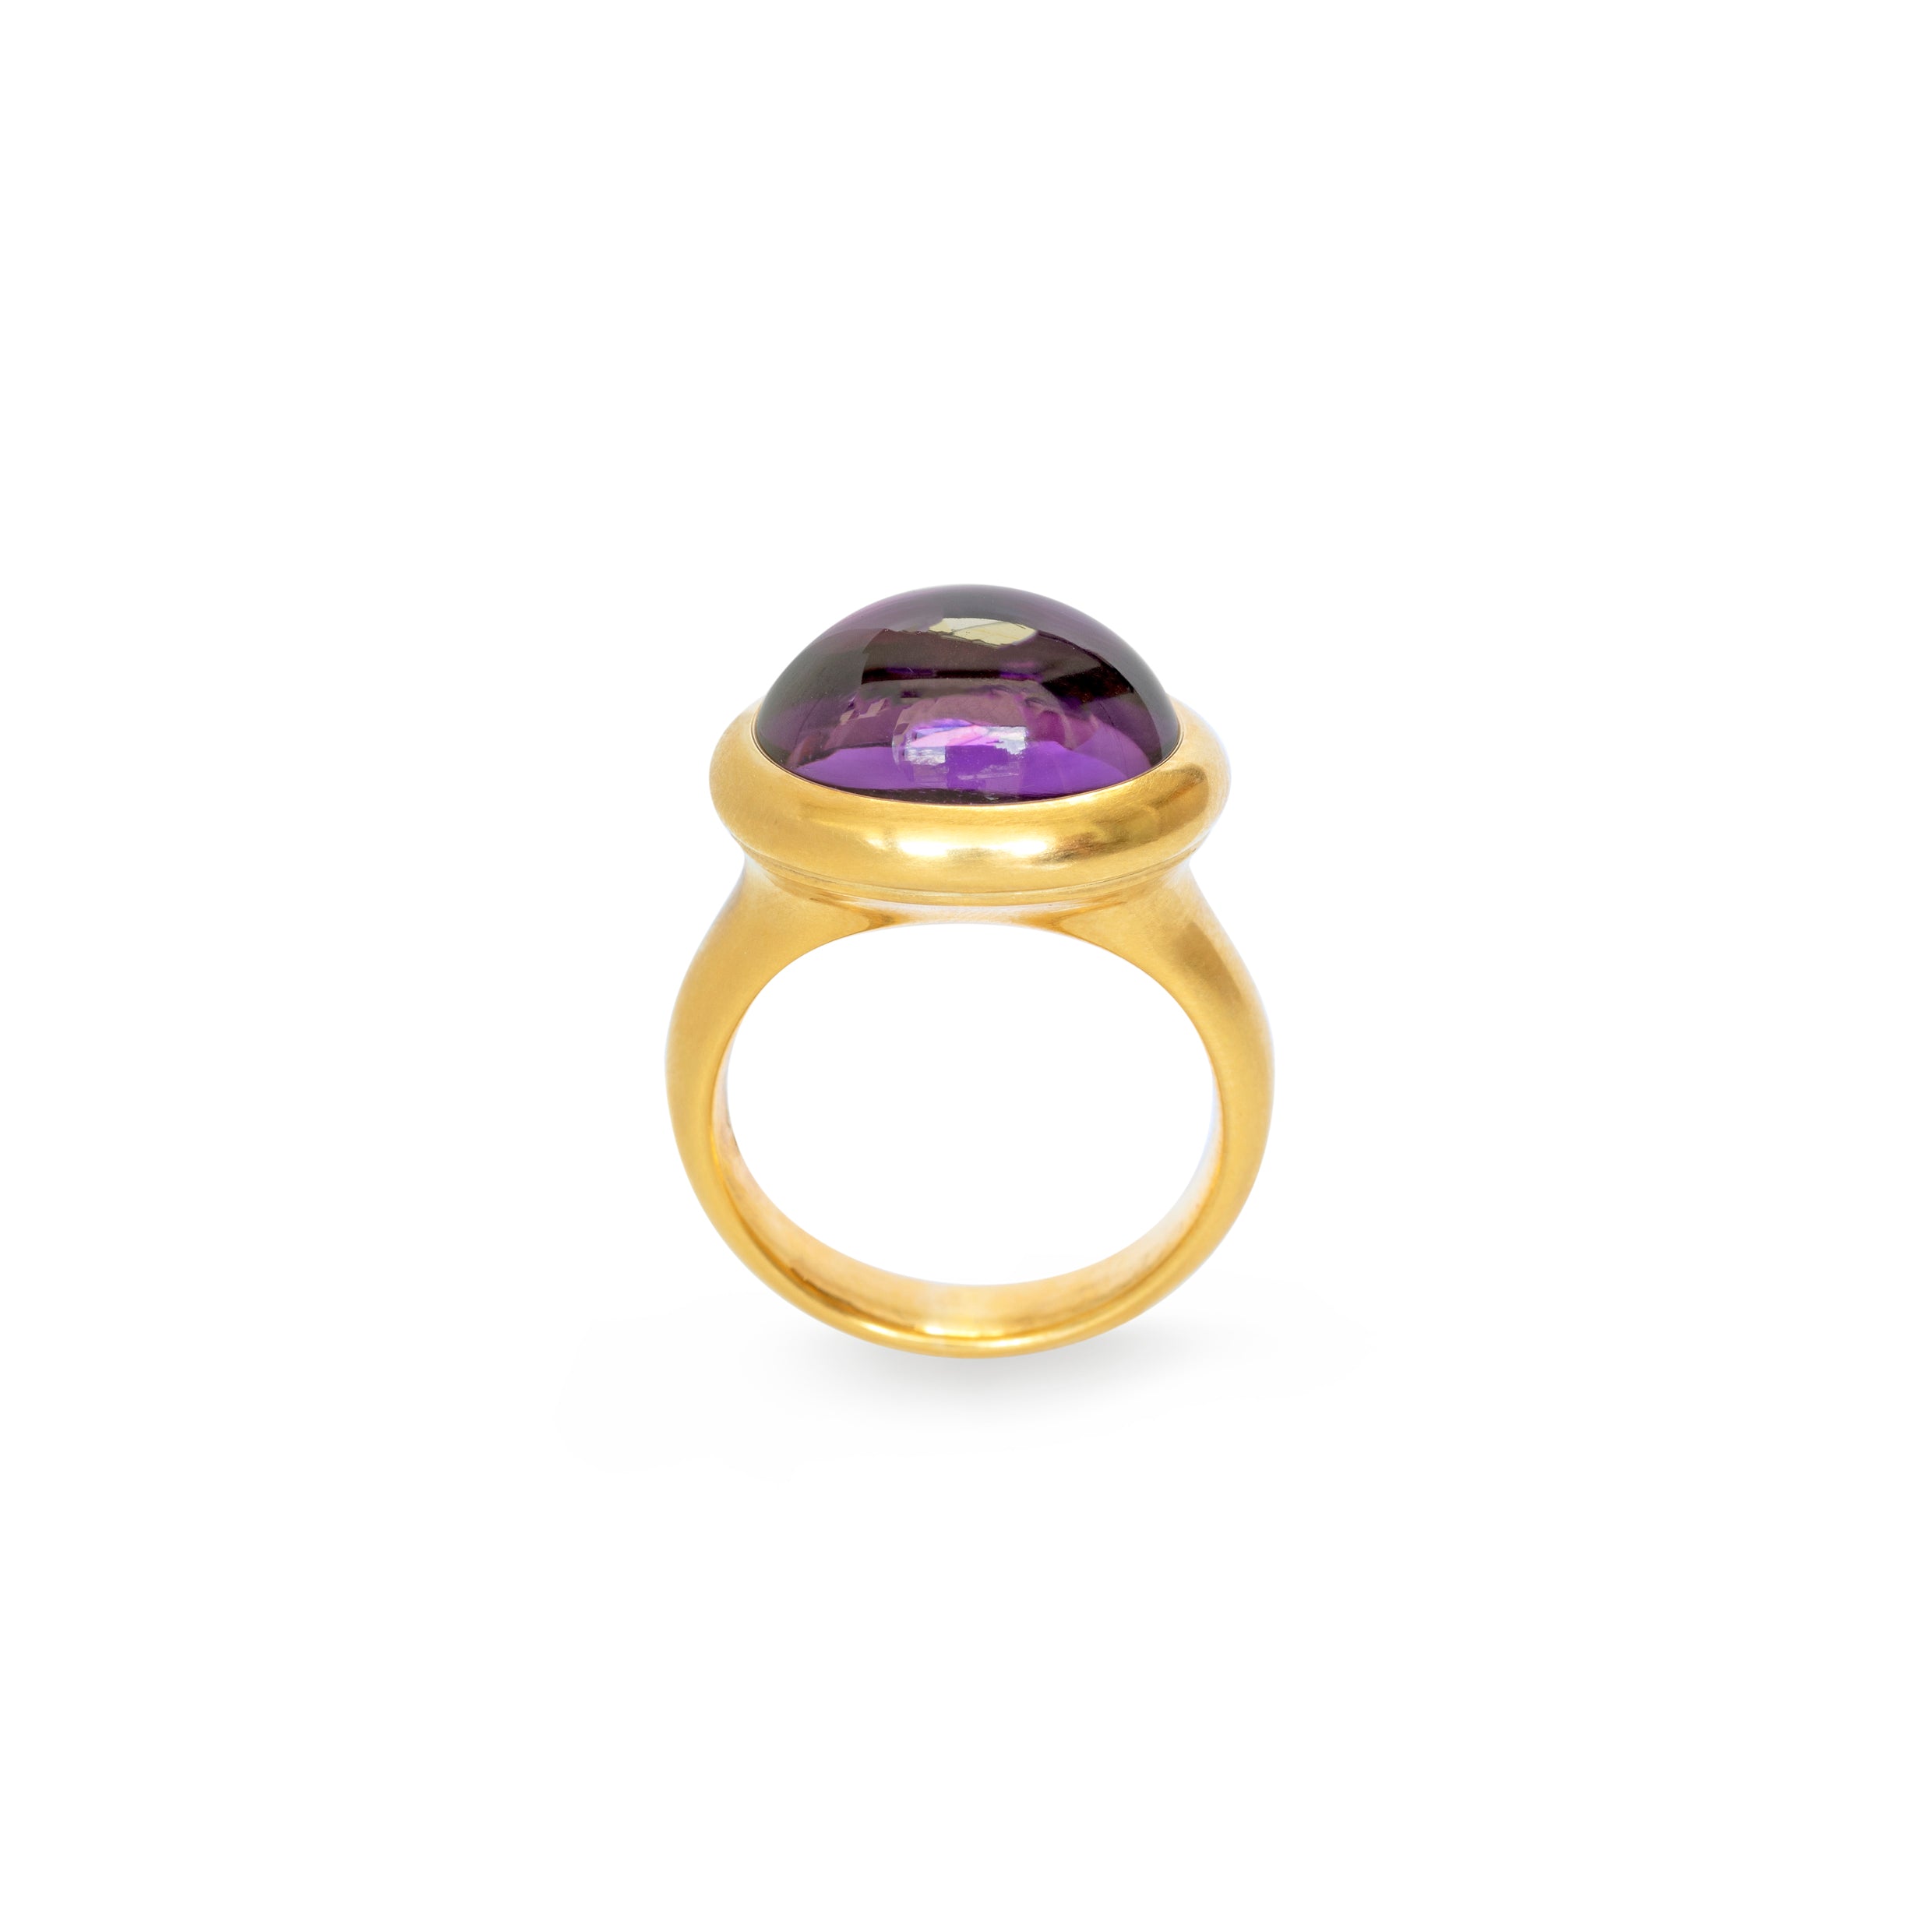 Mantelring tailliert mit Amethyst Cabochon